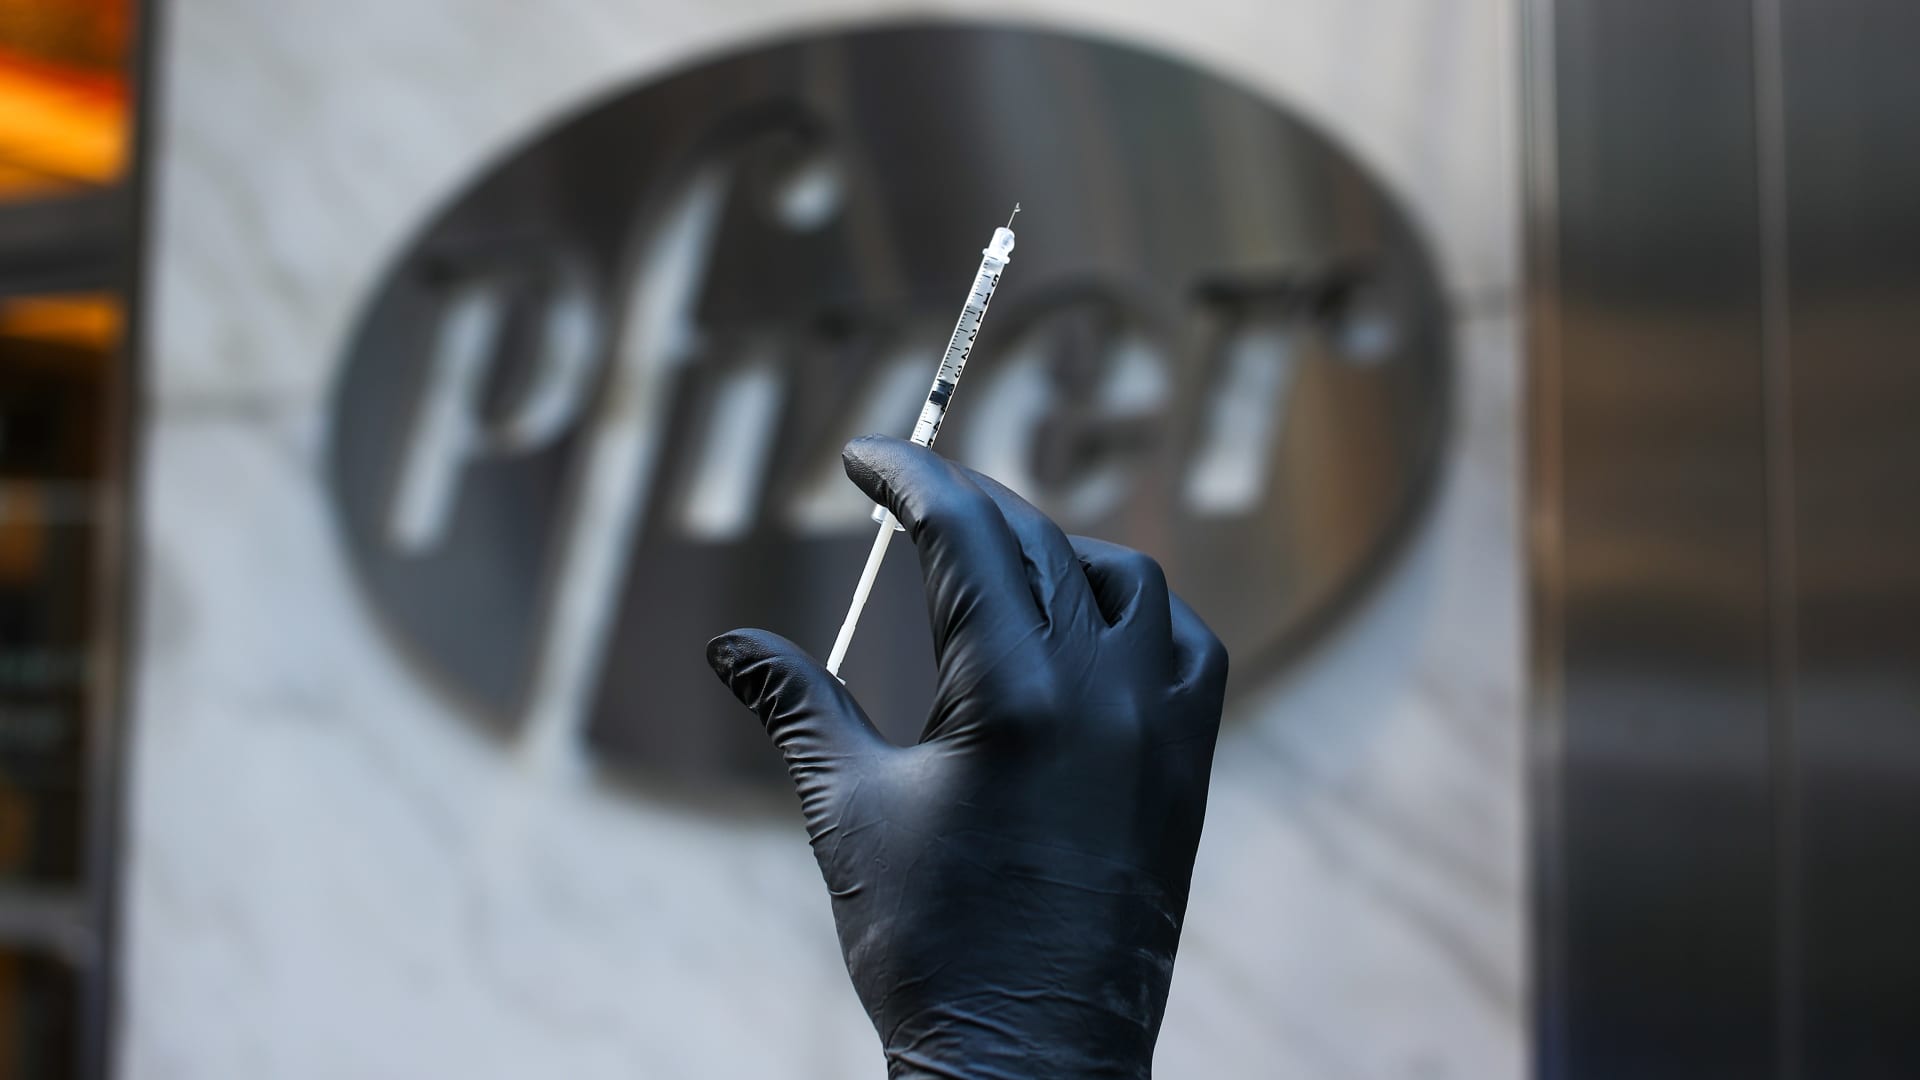 A syringe is seen by the logo of Pfizer's headquarter in Manhattan, New York City, United States on November 19, 2020.